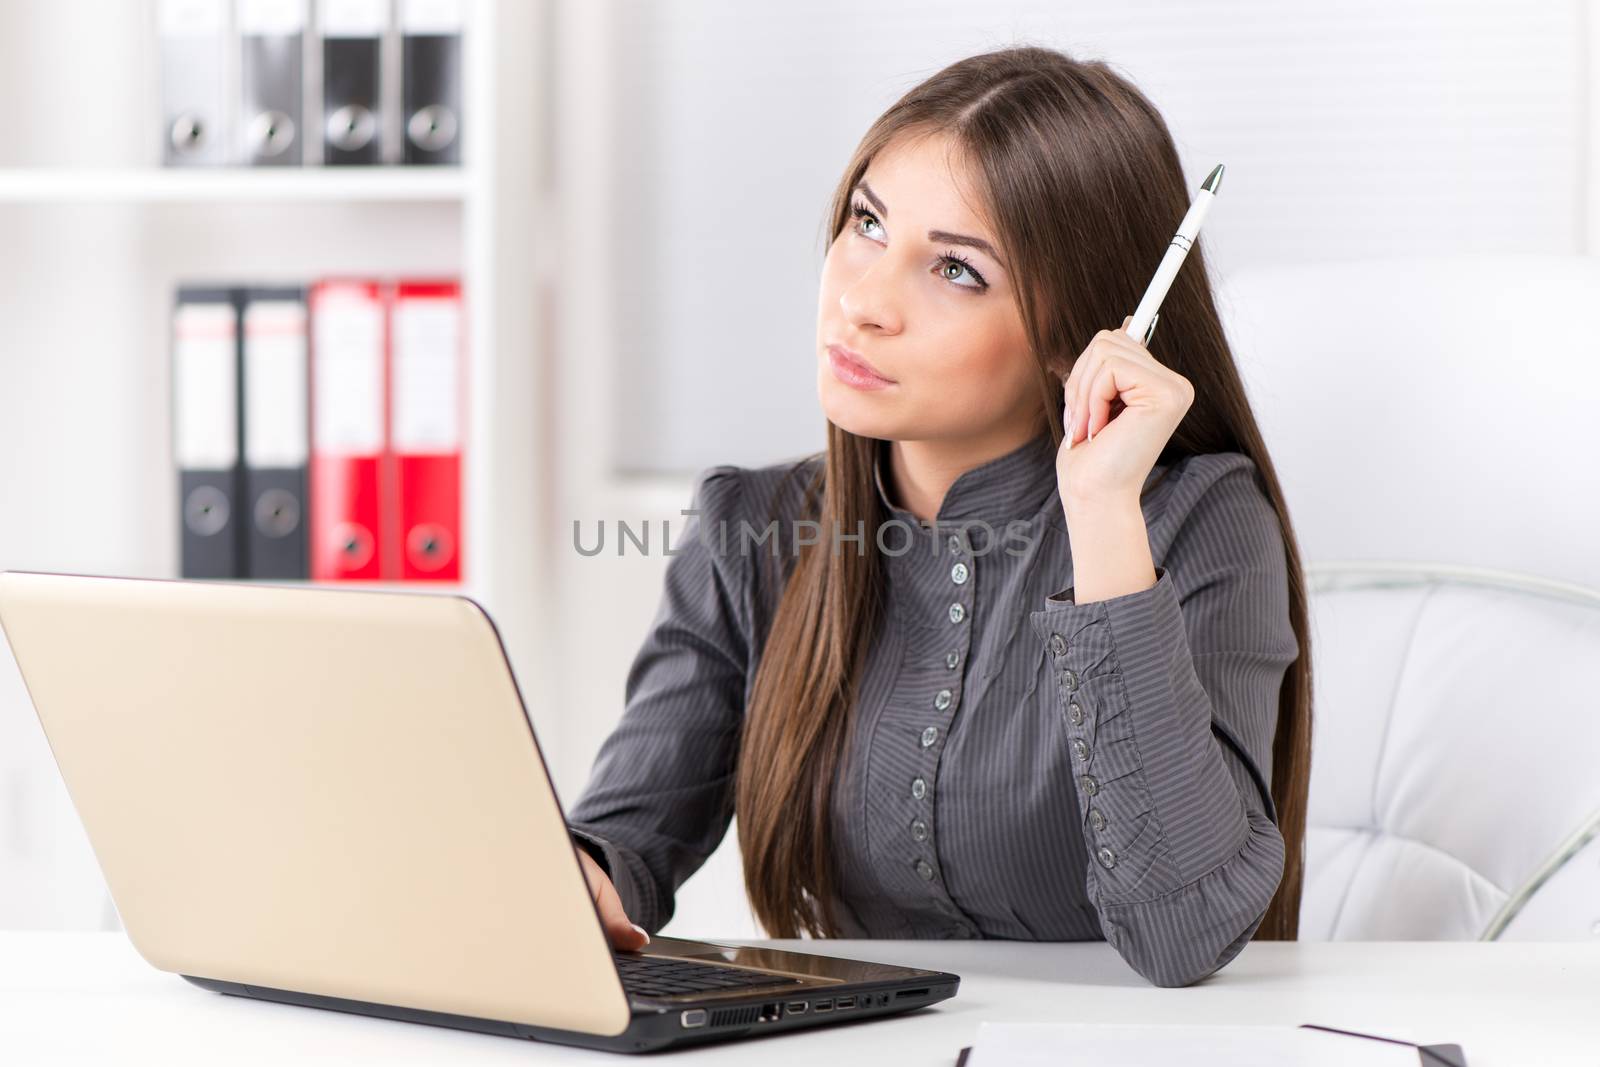 Businesswoman in the office, sitting, thinking and holding pencil in one hand. Having brilliant idea for business progress.